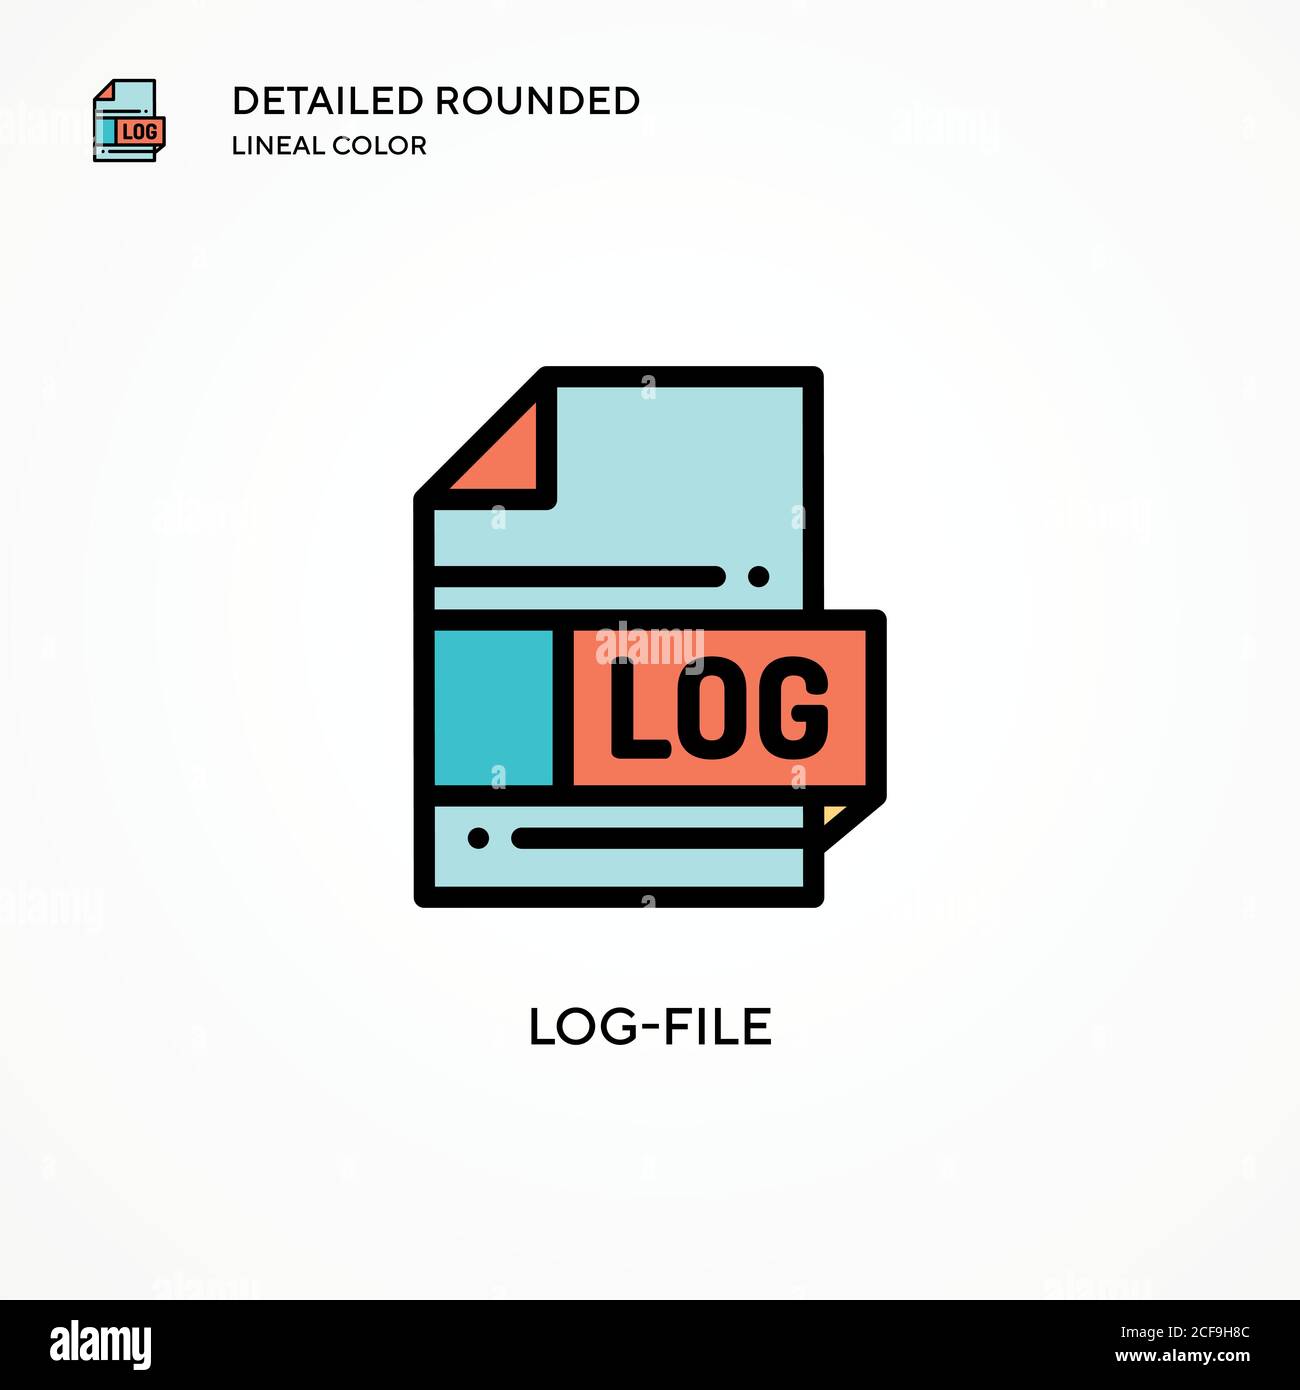 Log-file vector icon. Modern vector illustration concepts. Easy to edit and customize. Stock Vector